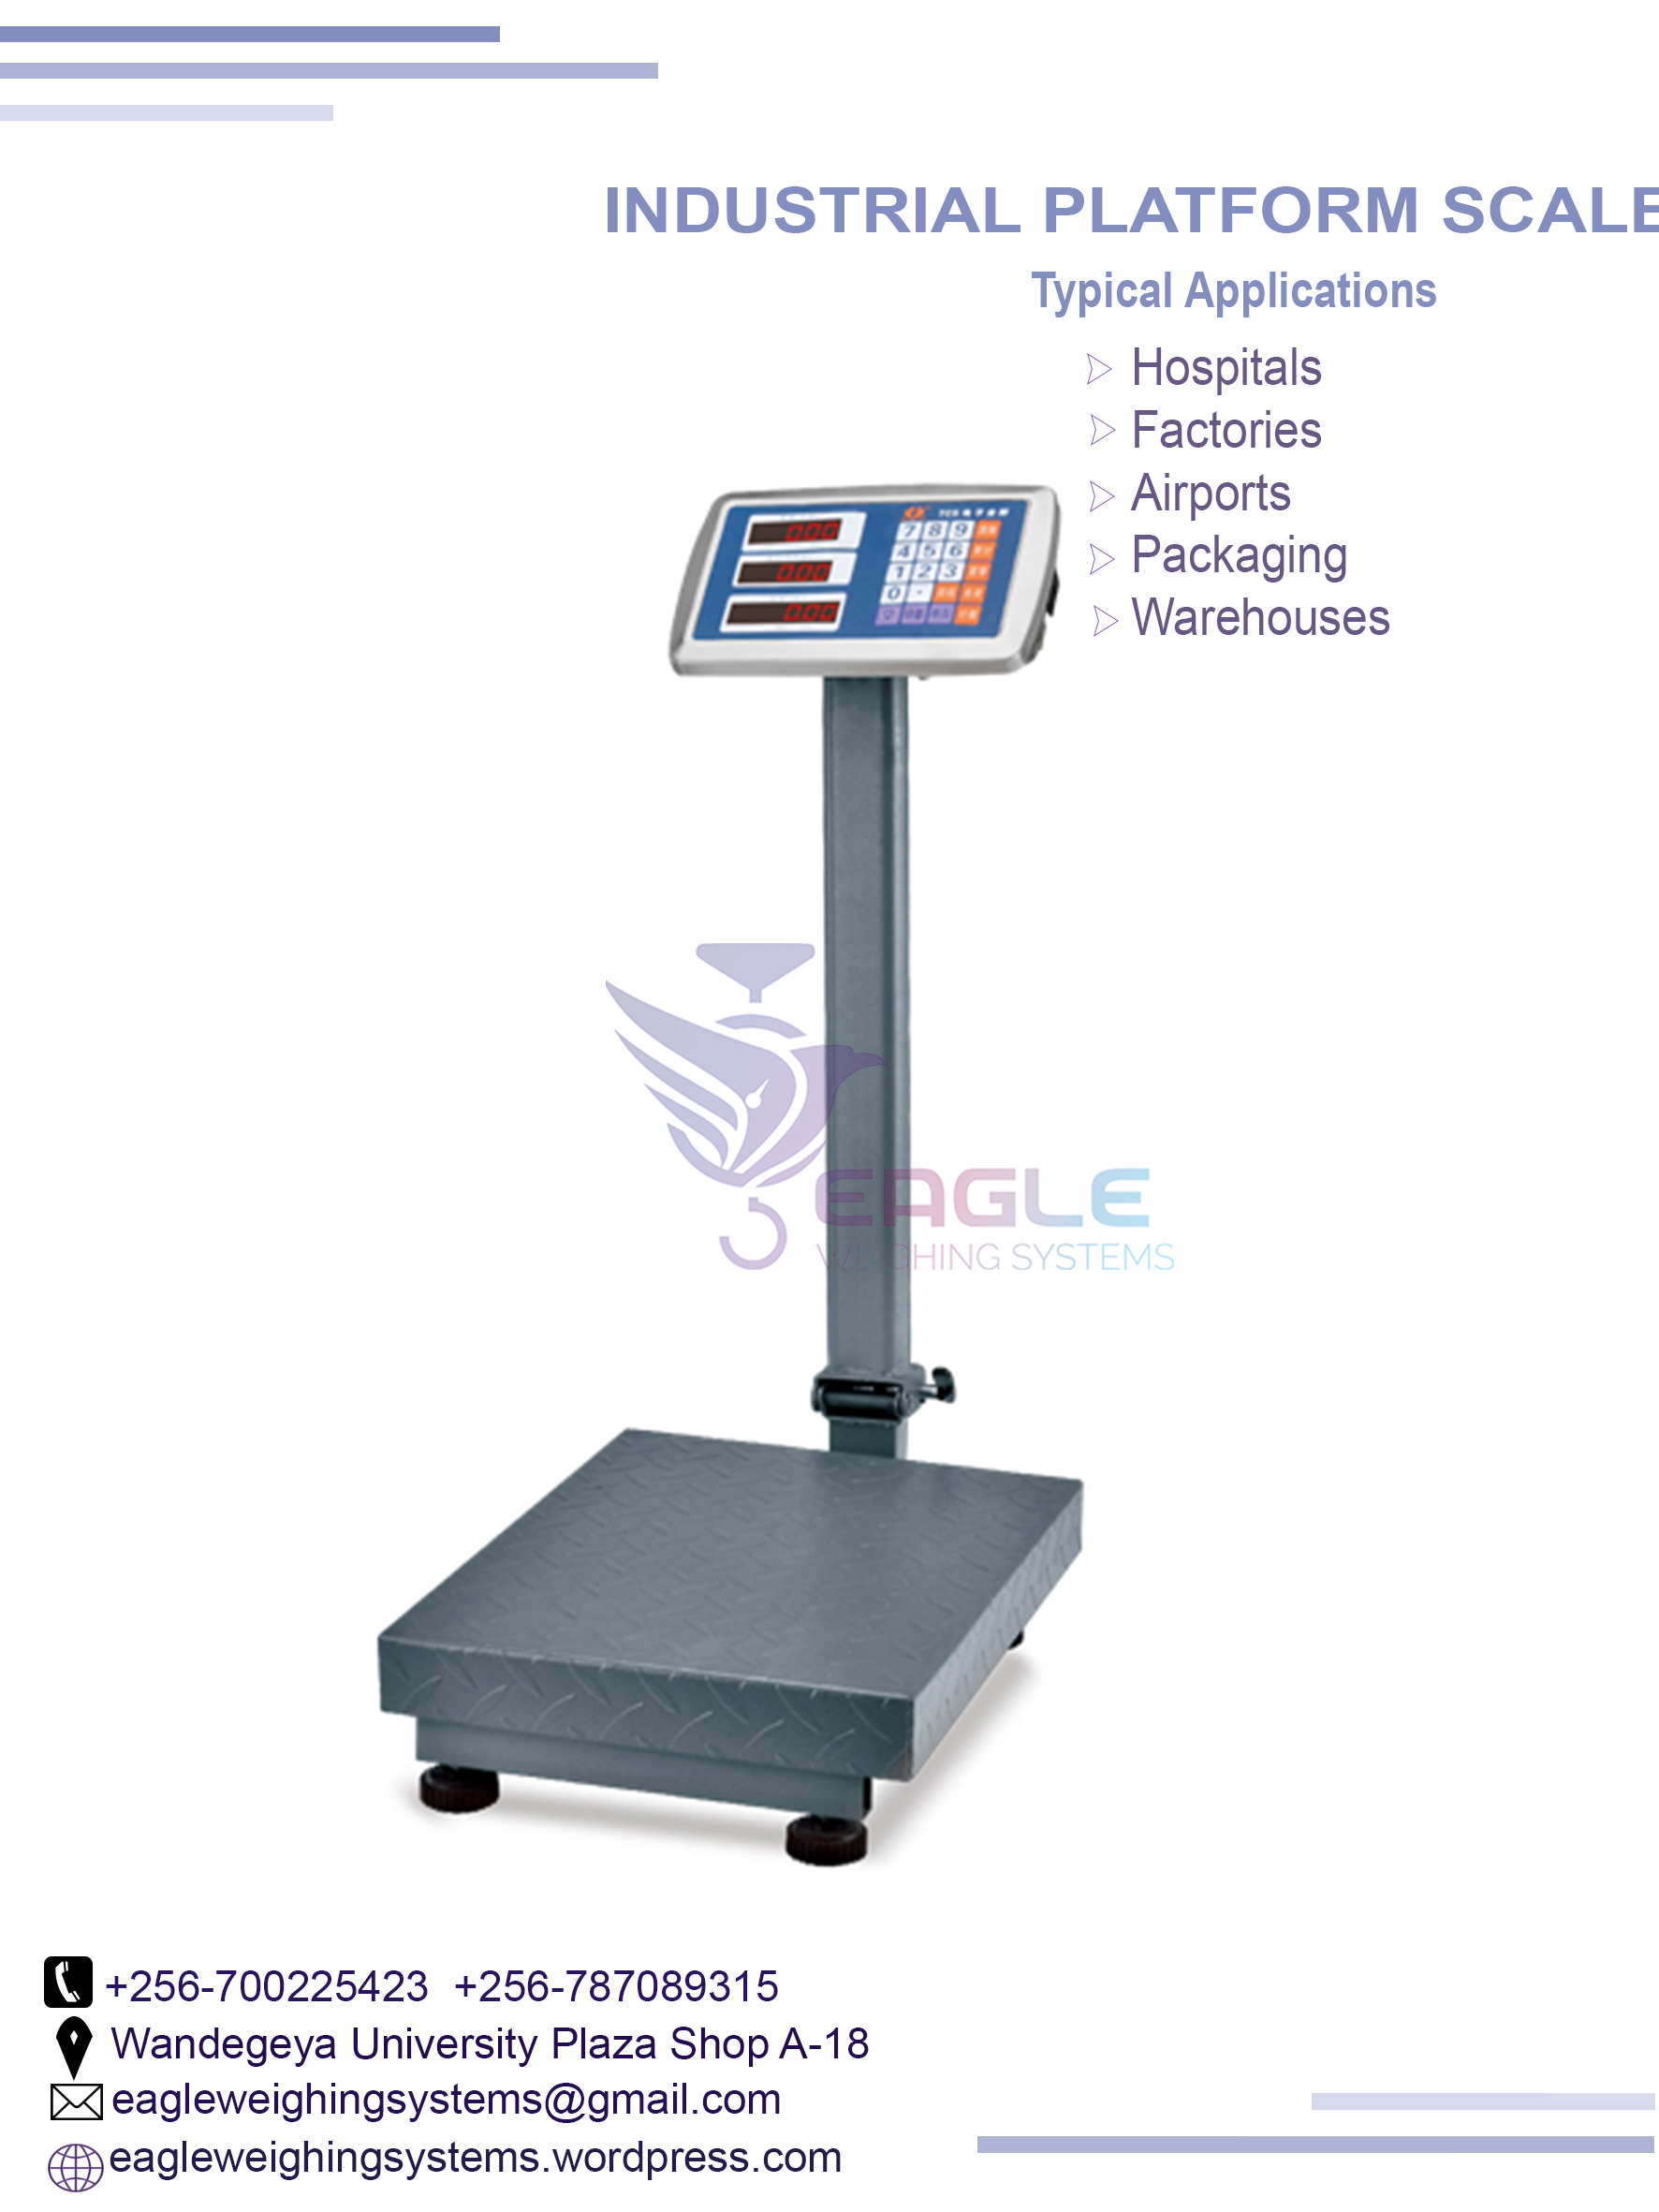 Electronic platform digital weighing scale with railing, Kampala Central Division, Central, Uganda